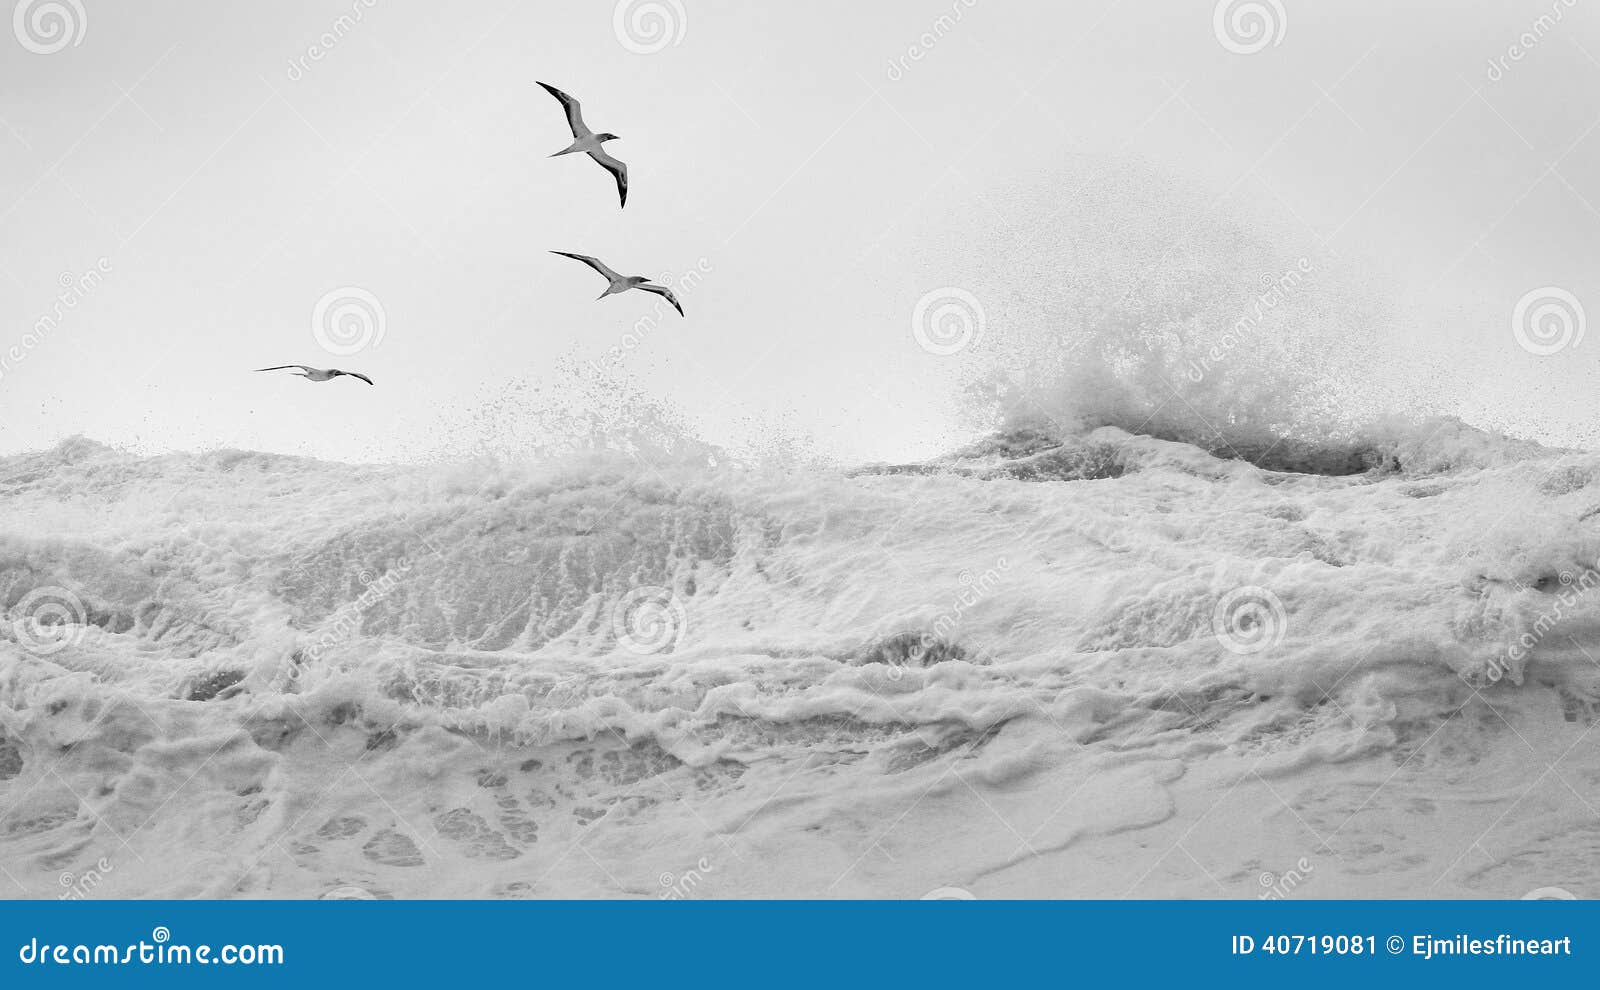 tropical birds over wind blown waves